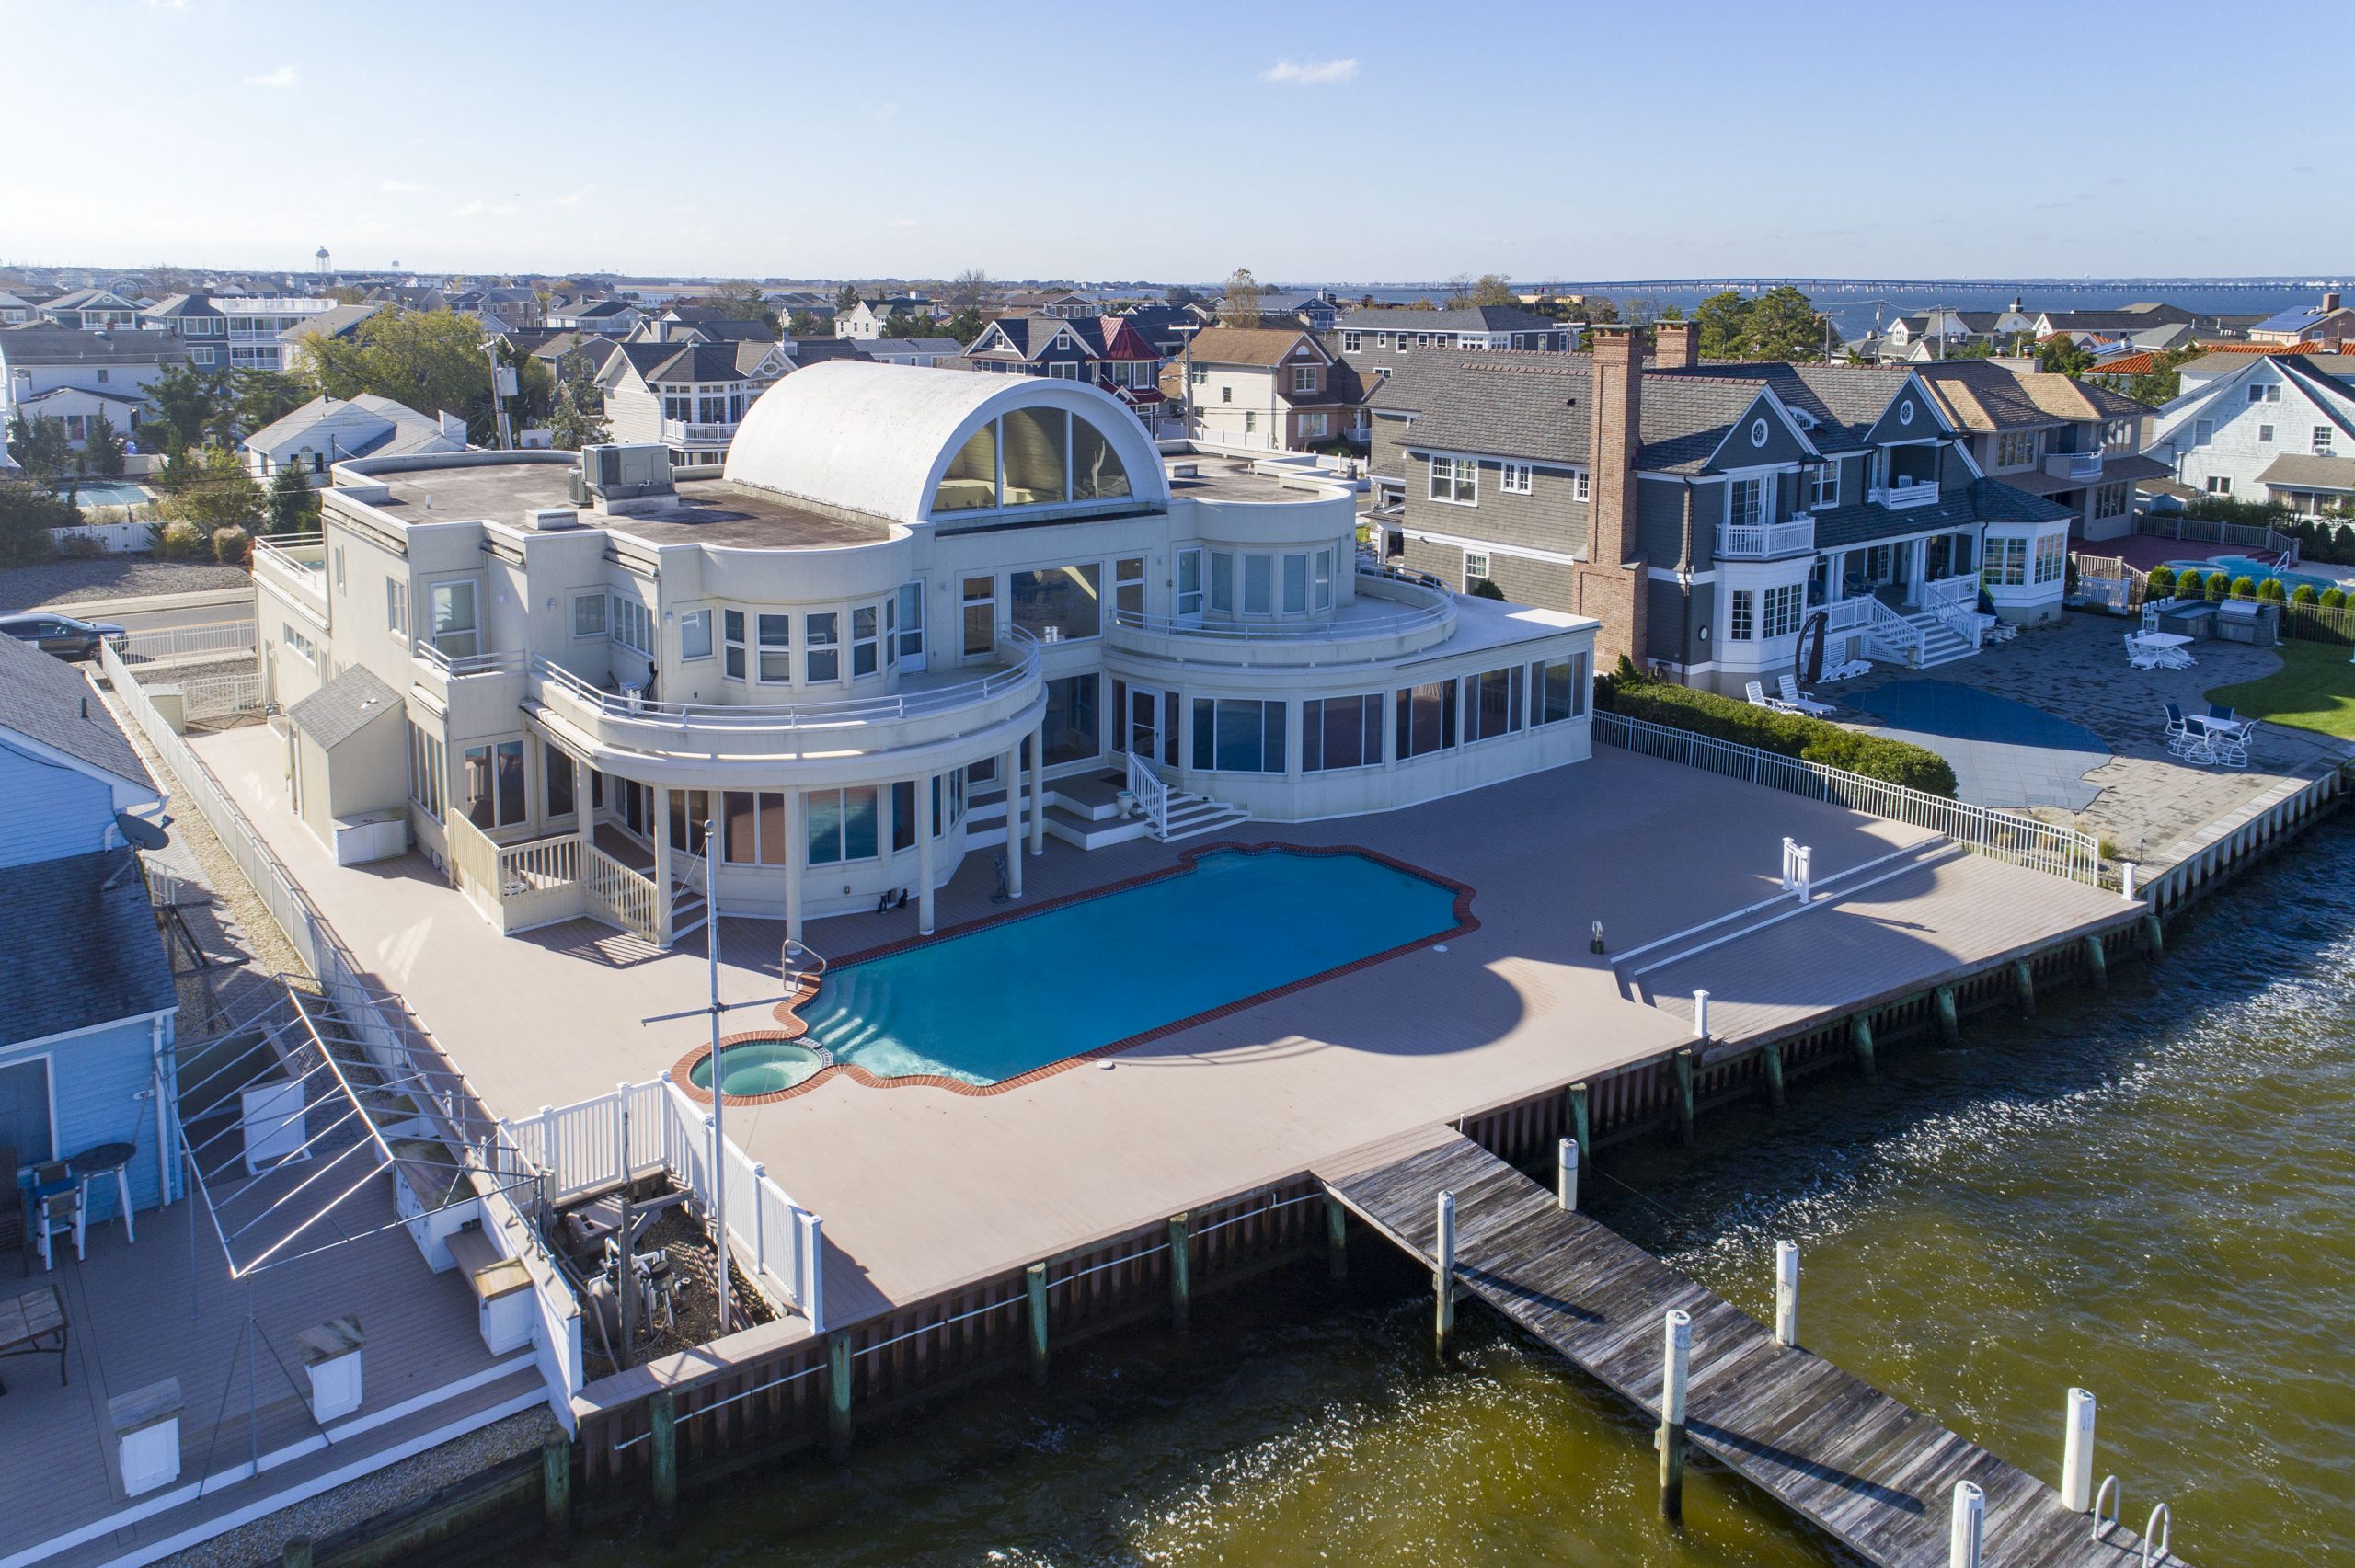 Actor Joe Pesci's Lavallette home, currently listed for sale. (Photo Credit: TopTenRealEstateDeals.com)